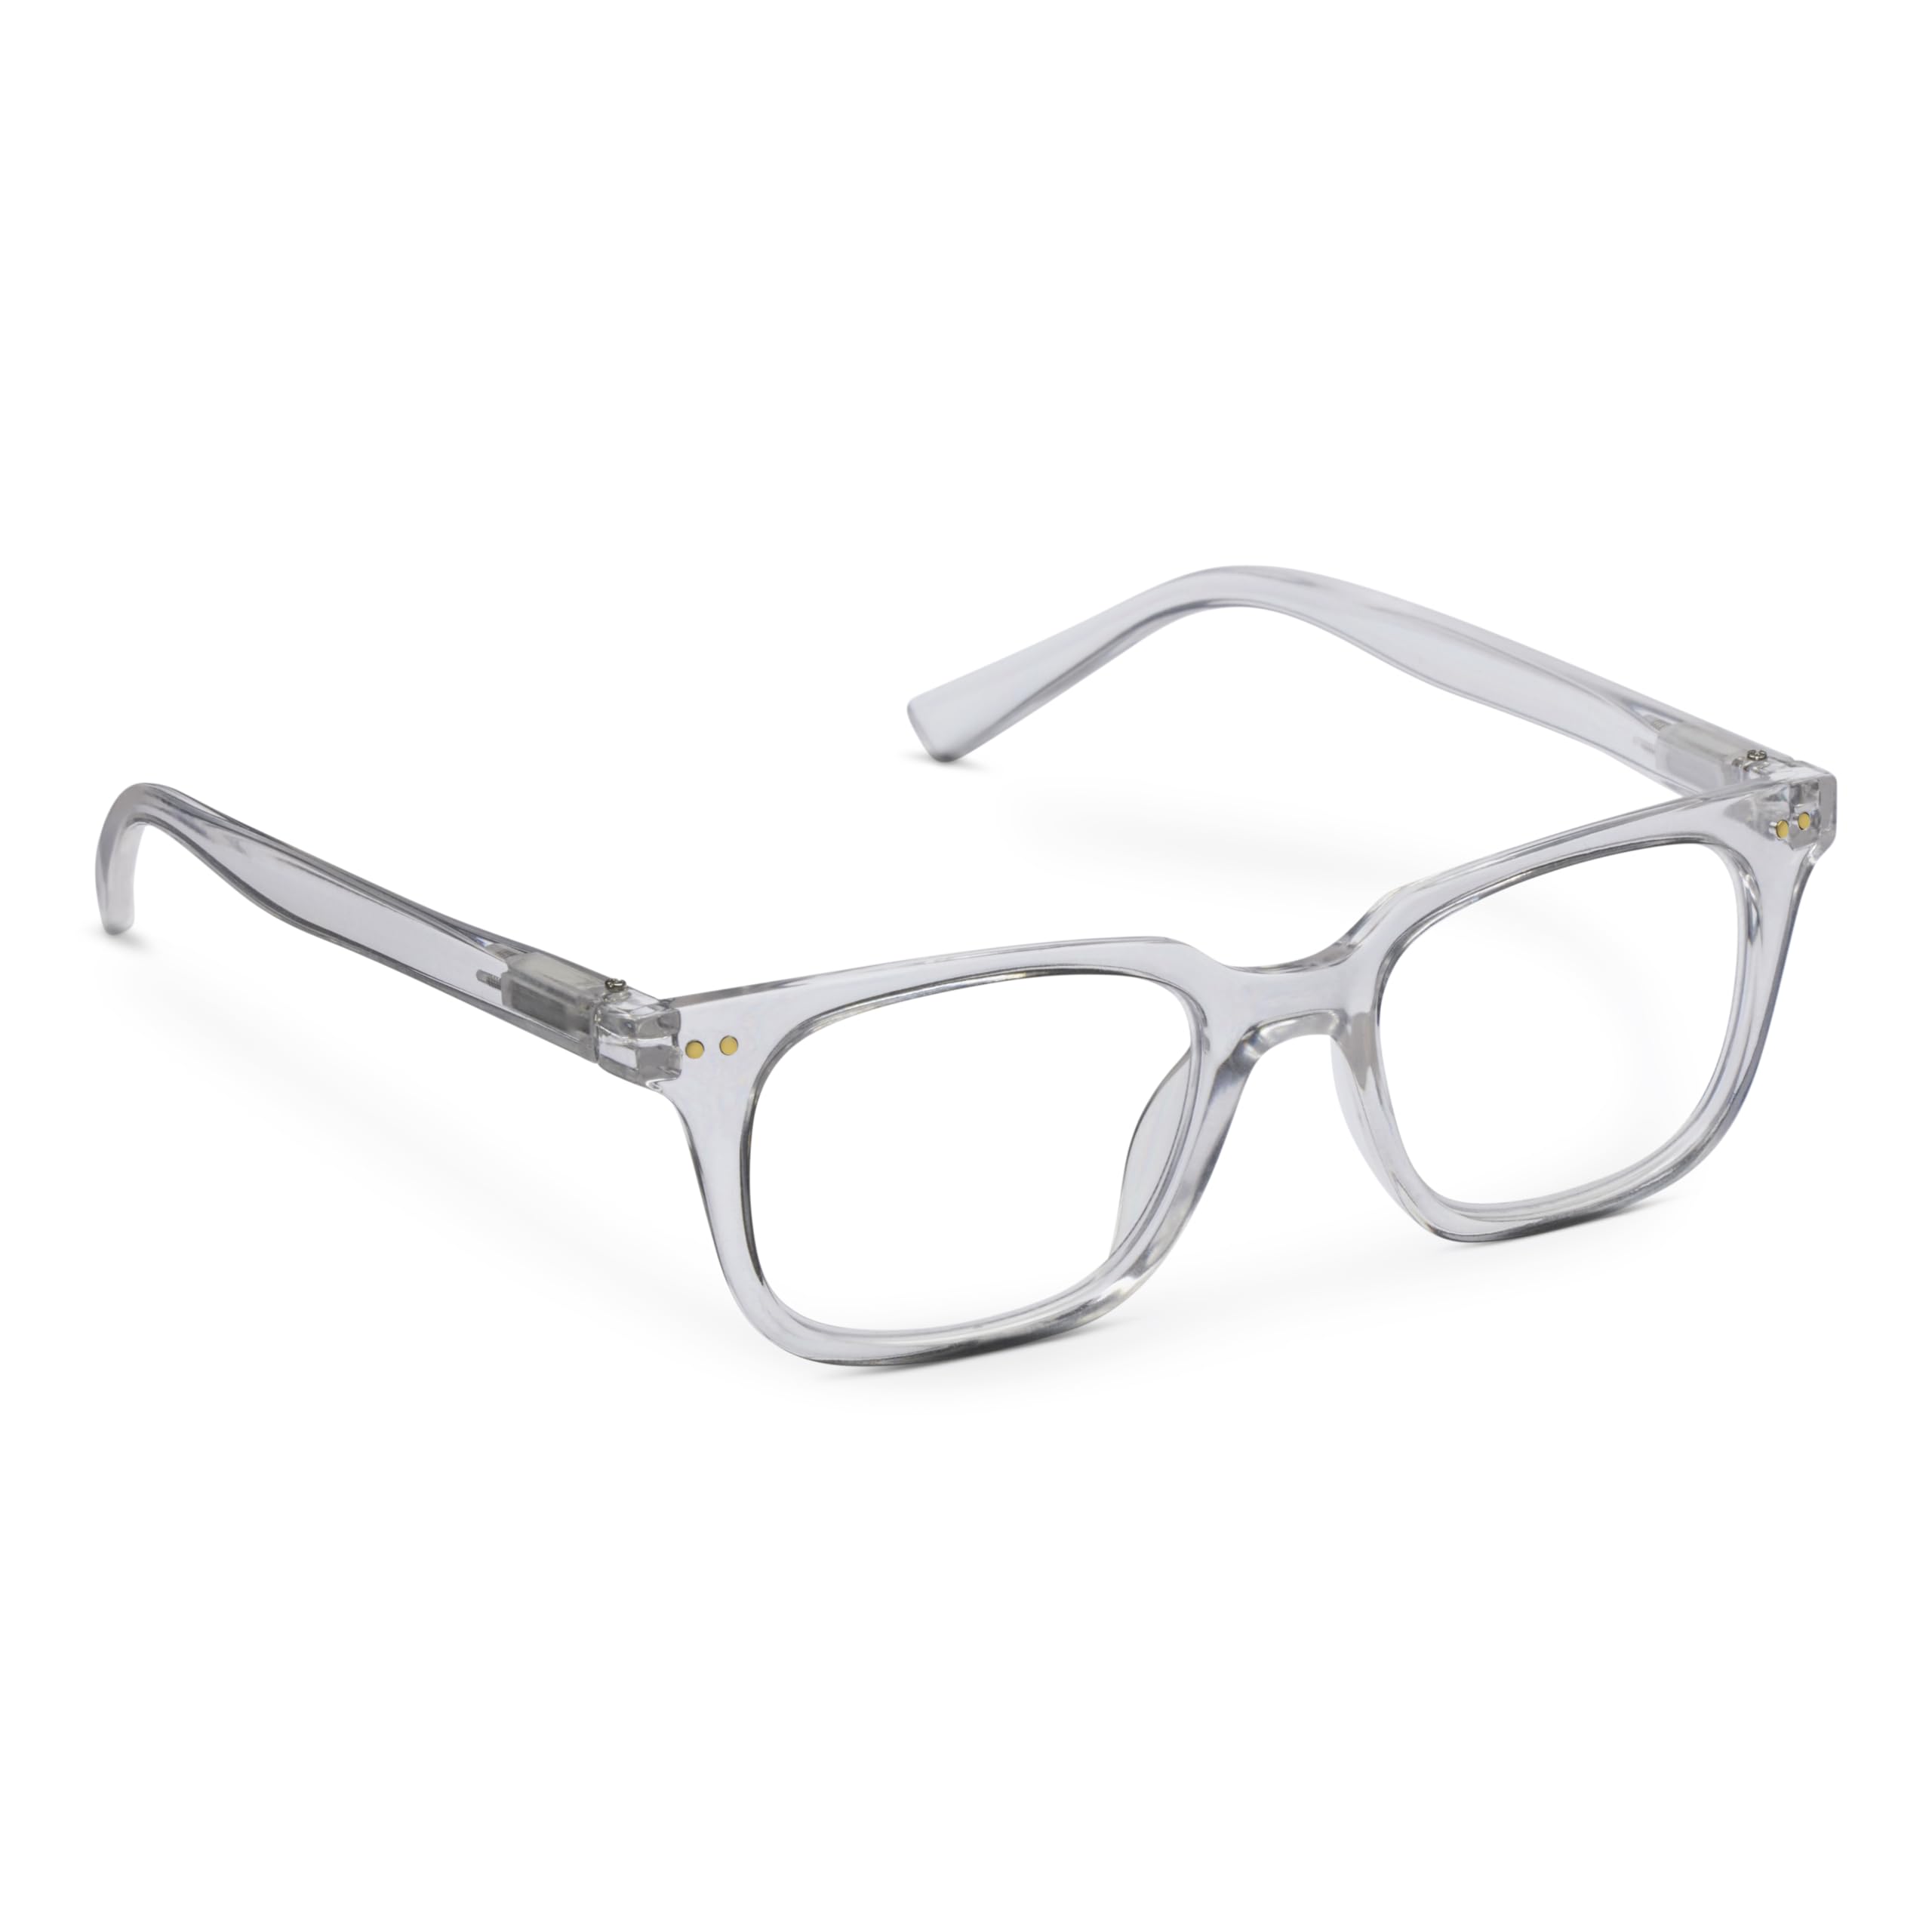 Peepers by PeeperSpecs Tennessee Square Blue Light Blocking Reading Glasses